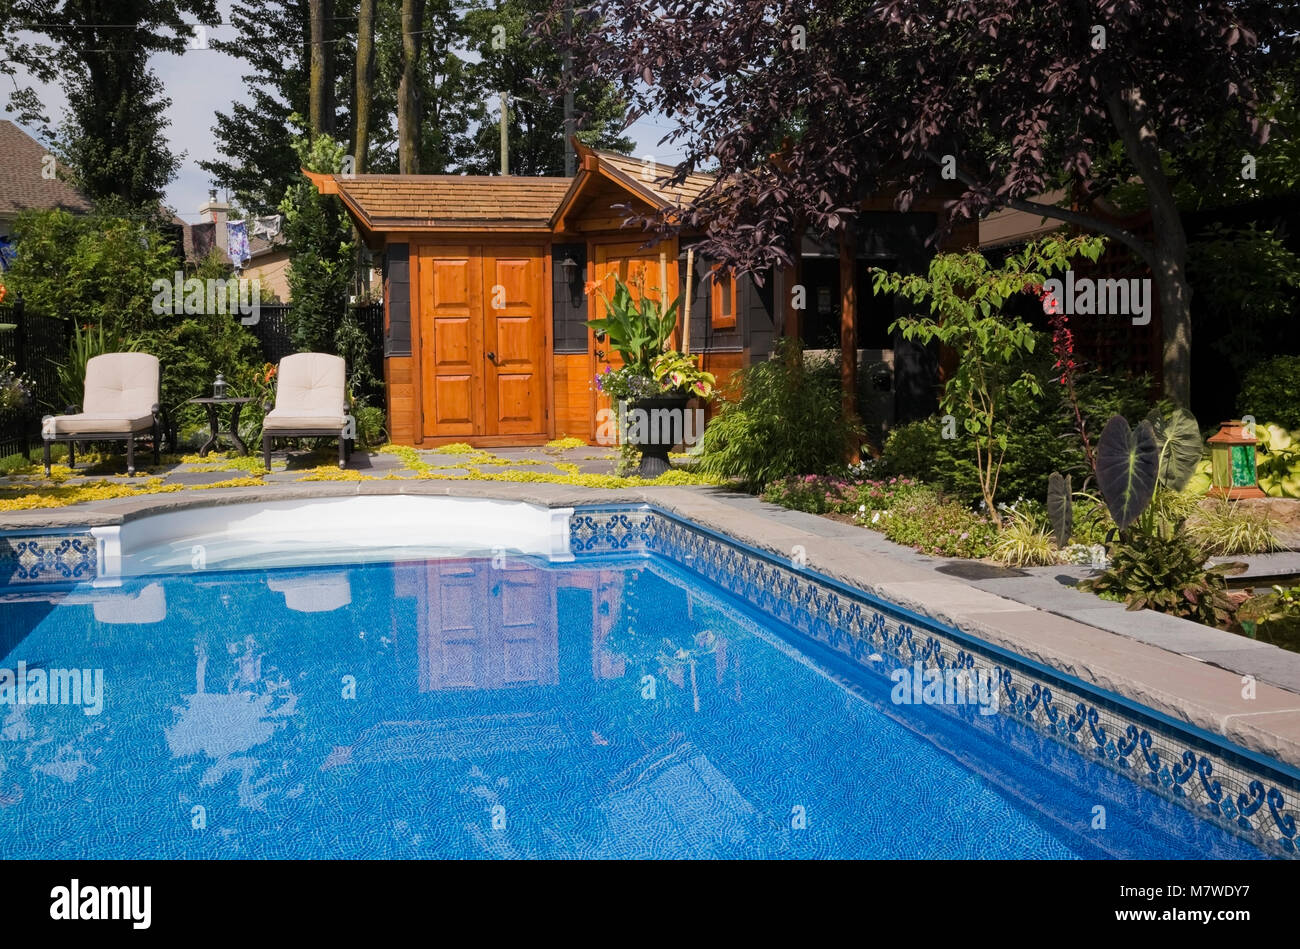 Swimming pool and long chairs on patio stones next to a storage shed in a landscaped residential backyard in summer. Stock Photo